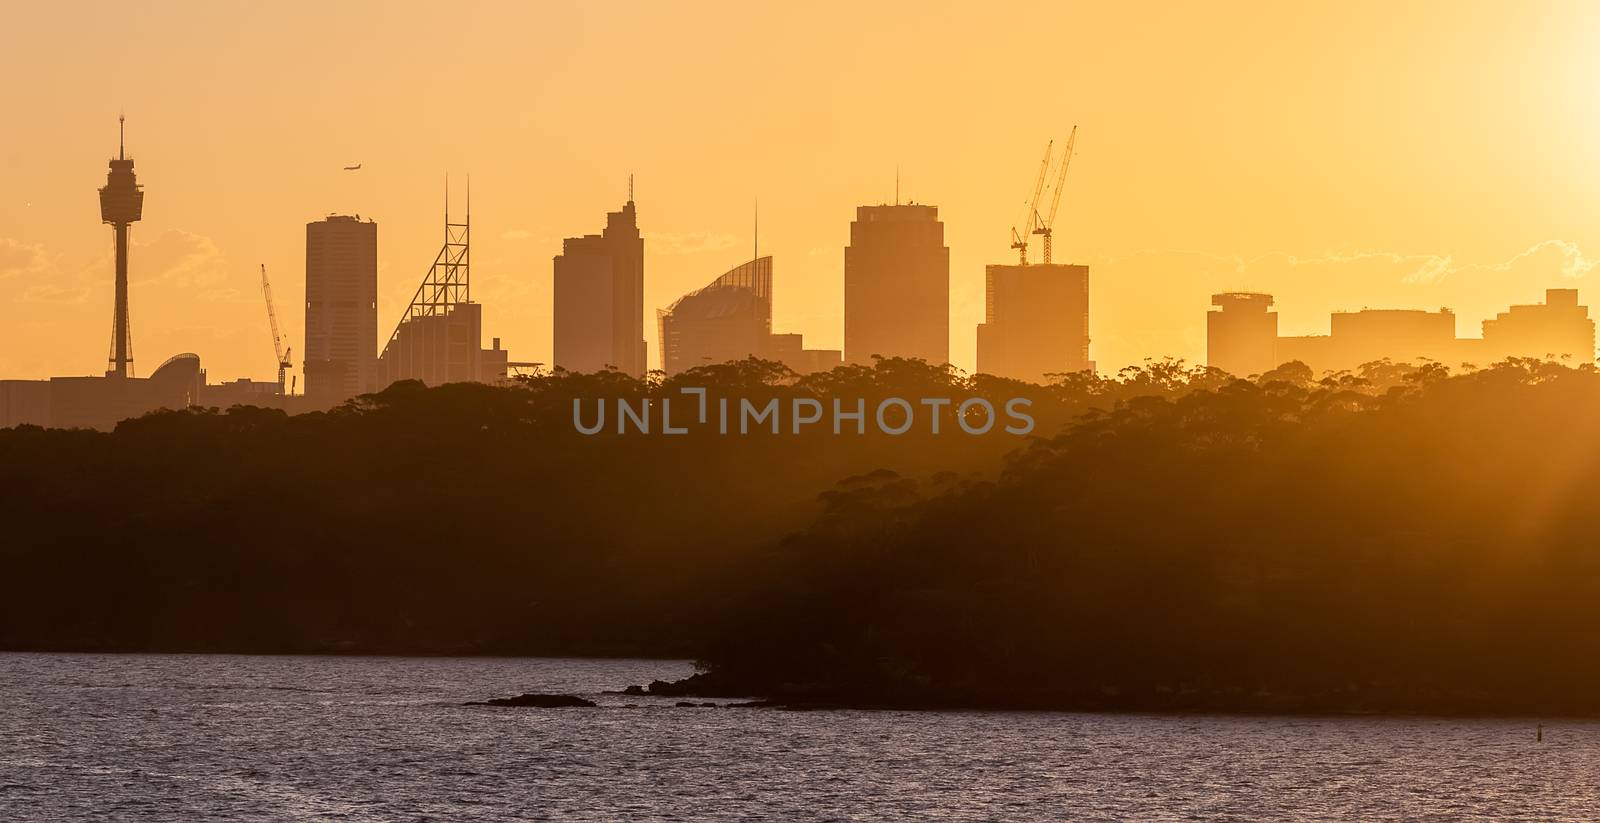 Close silhouette view of Sydney downtown with trees in the foreground. Sun rays spreading an amazing orange color cast over the trees. Beautiful sky.